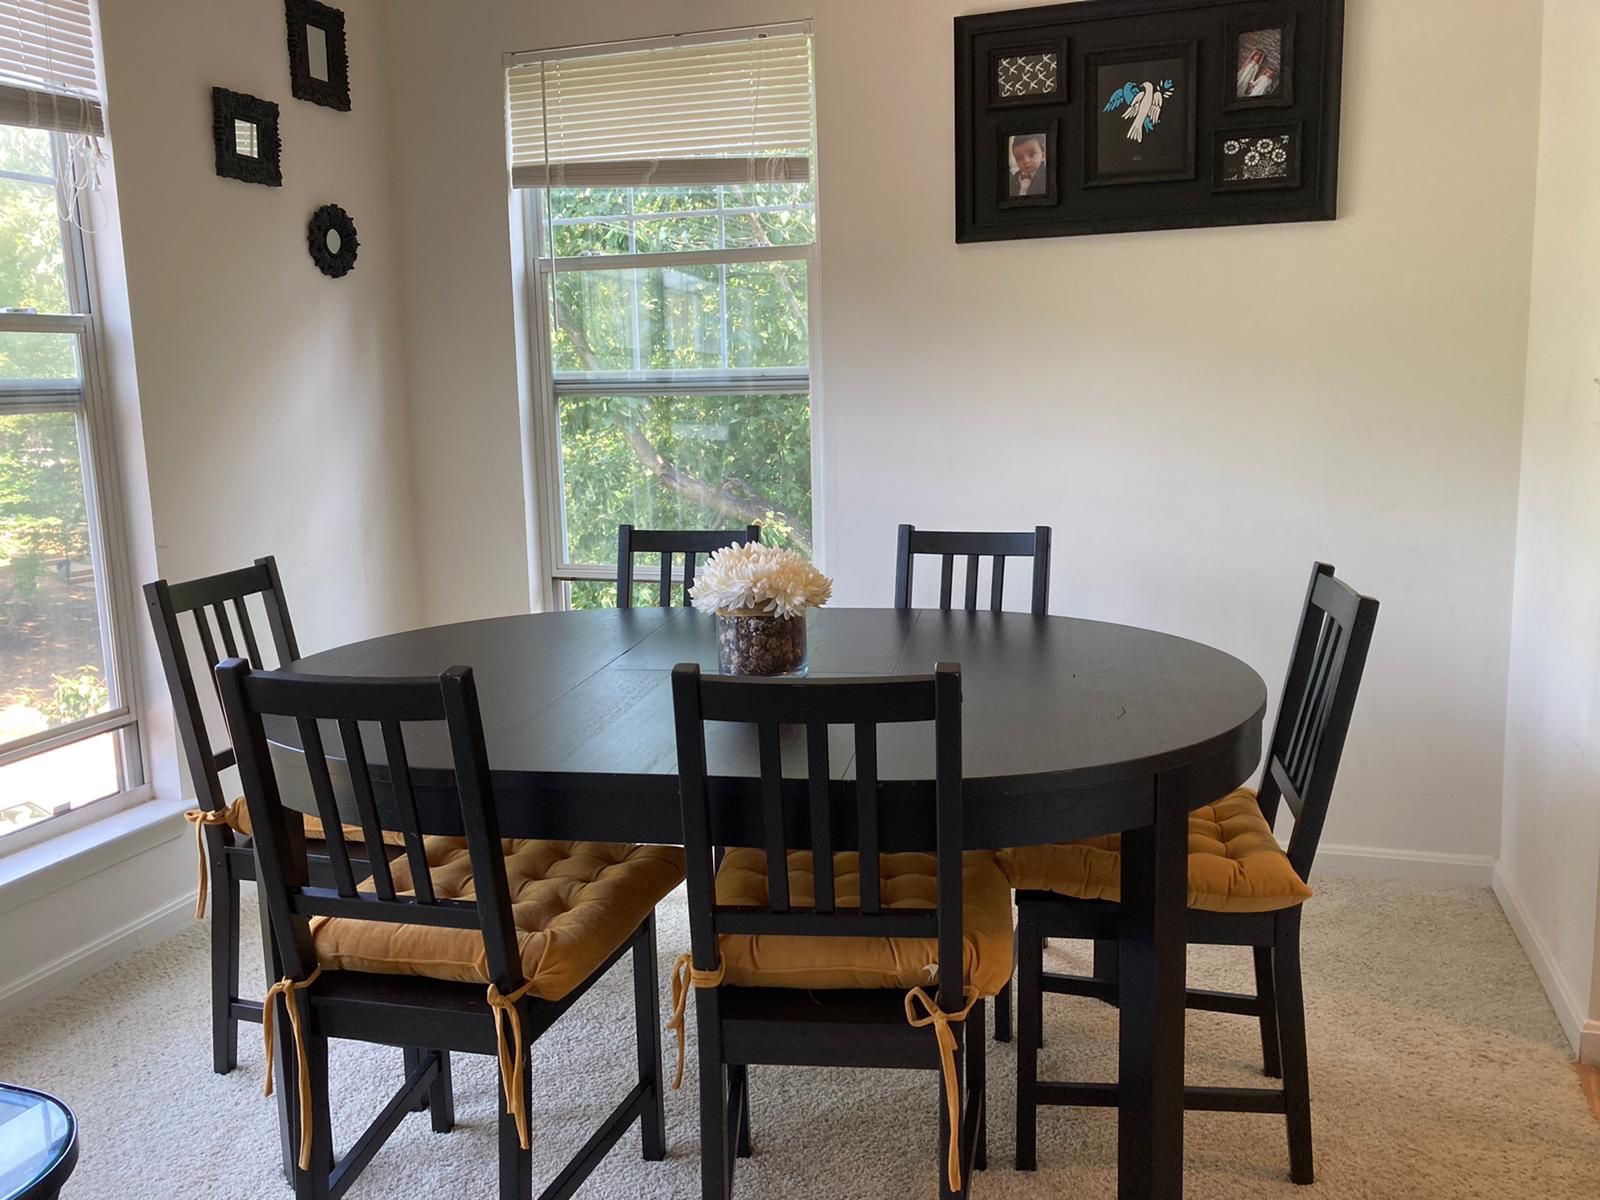 Extendable dining table with 6 chairs and accessories